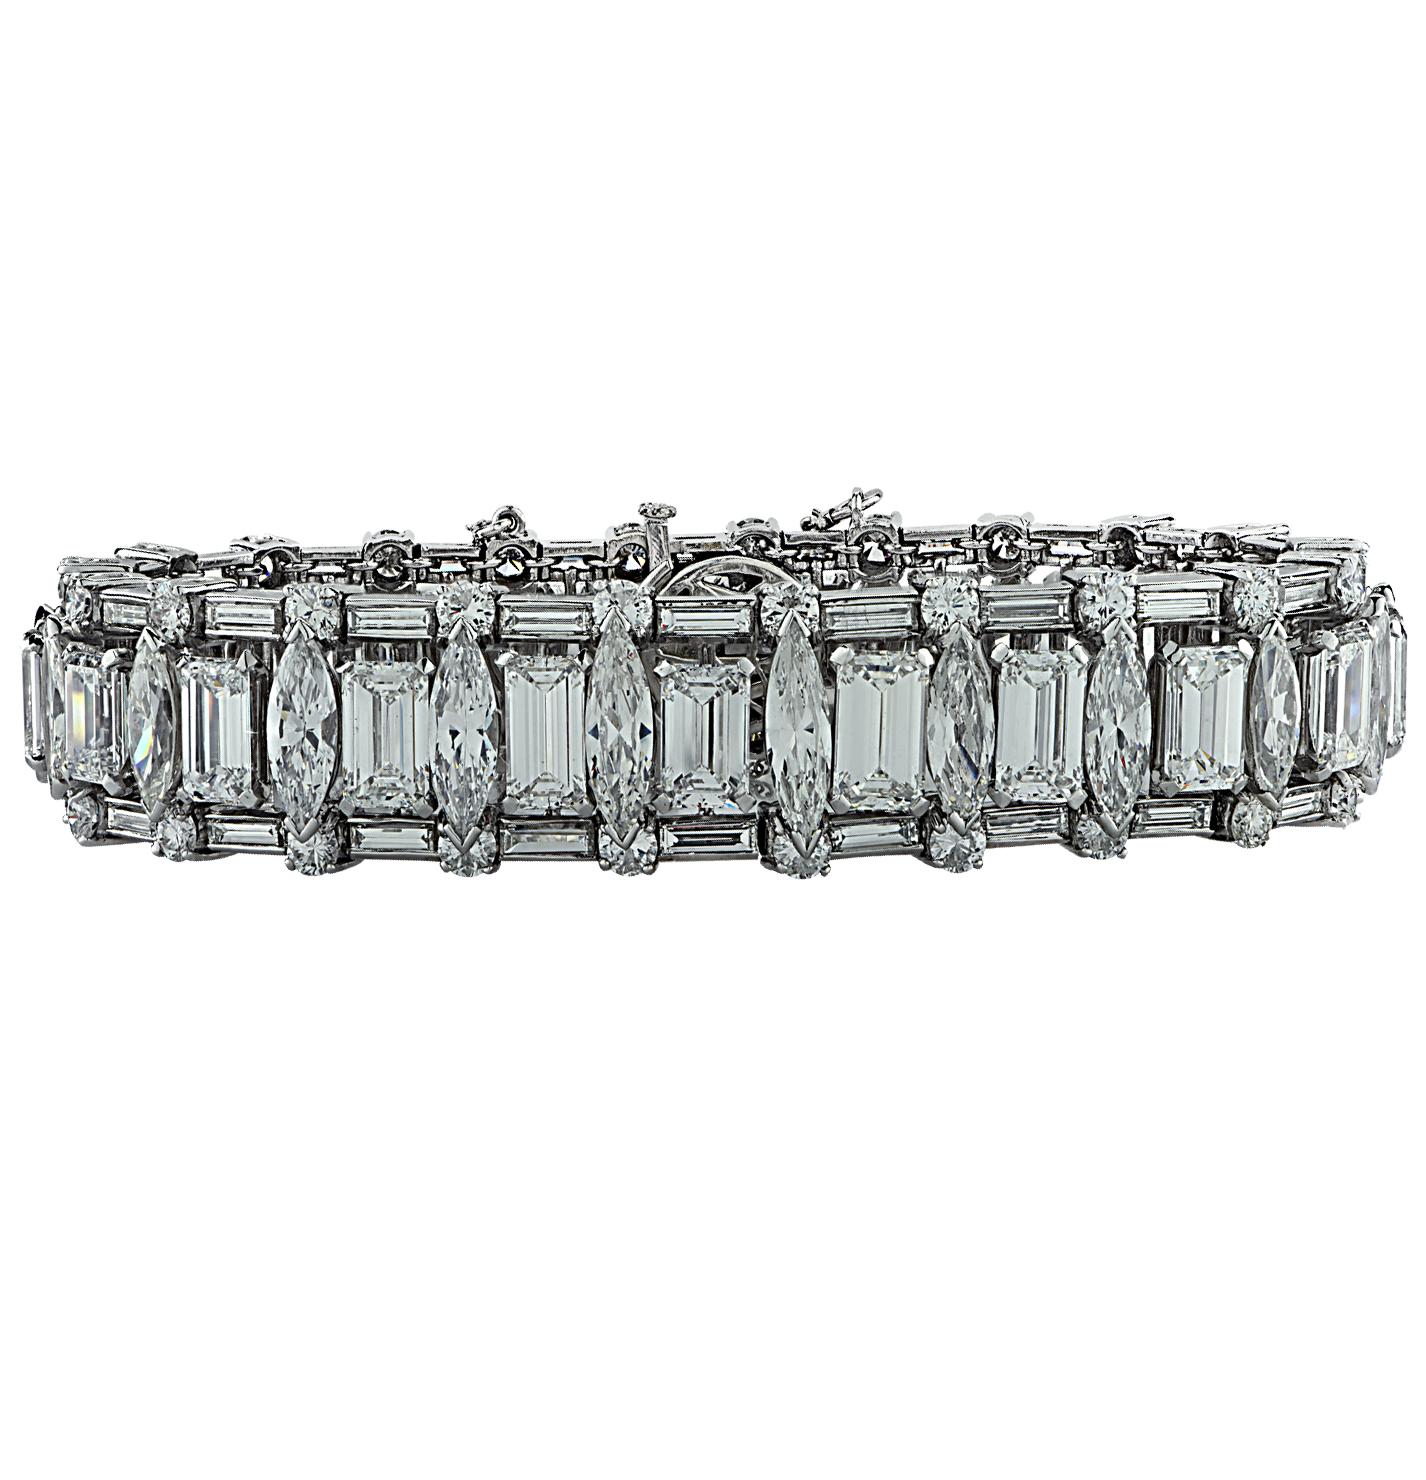 Spectacular J.E. Caldwell diamond bracelet crafted in platinum, featuring 132 mixed cut diamonds weighing approximately 45 carats total, F-I color, VS clarity.  22 emerald cut diamonds weighing approximately 22 carats total, F-G color VS clarity,